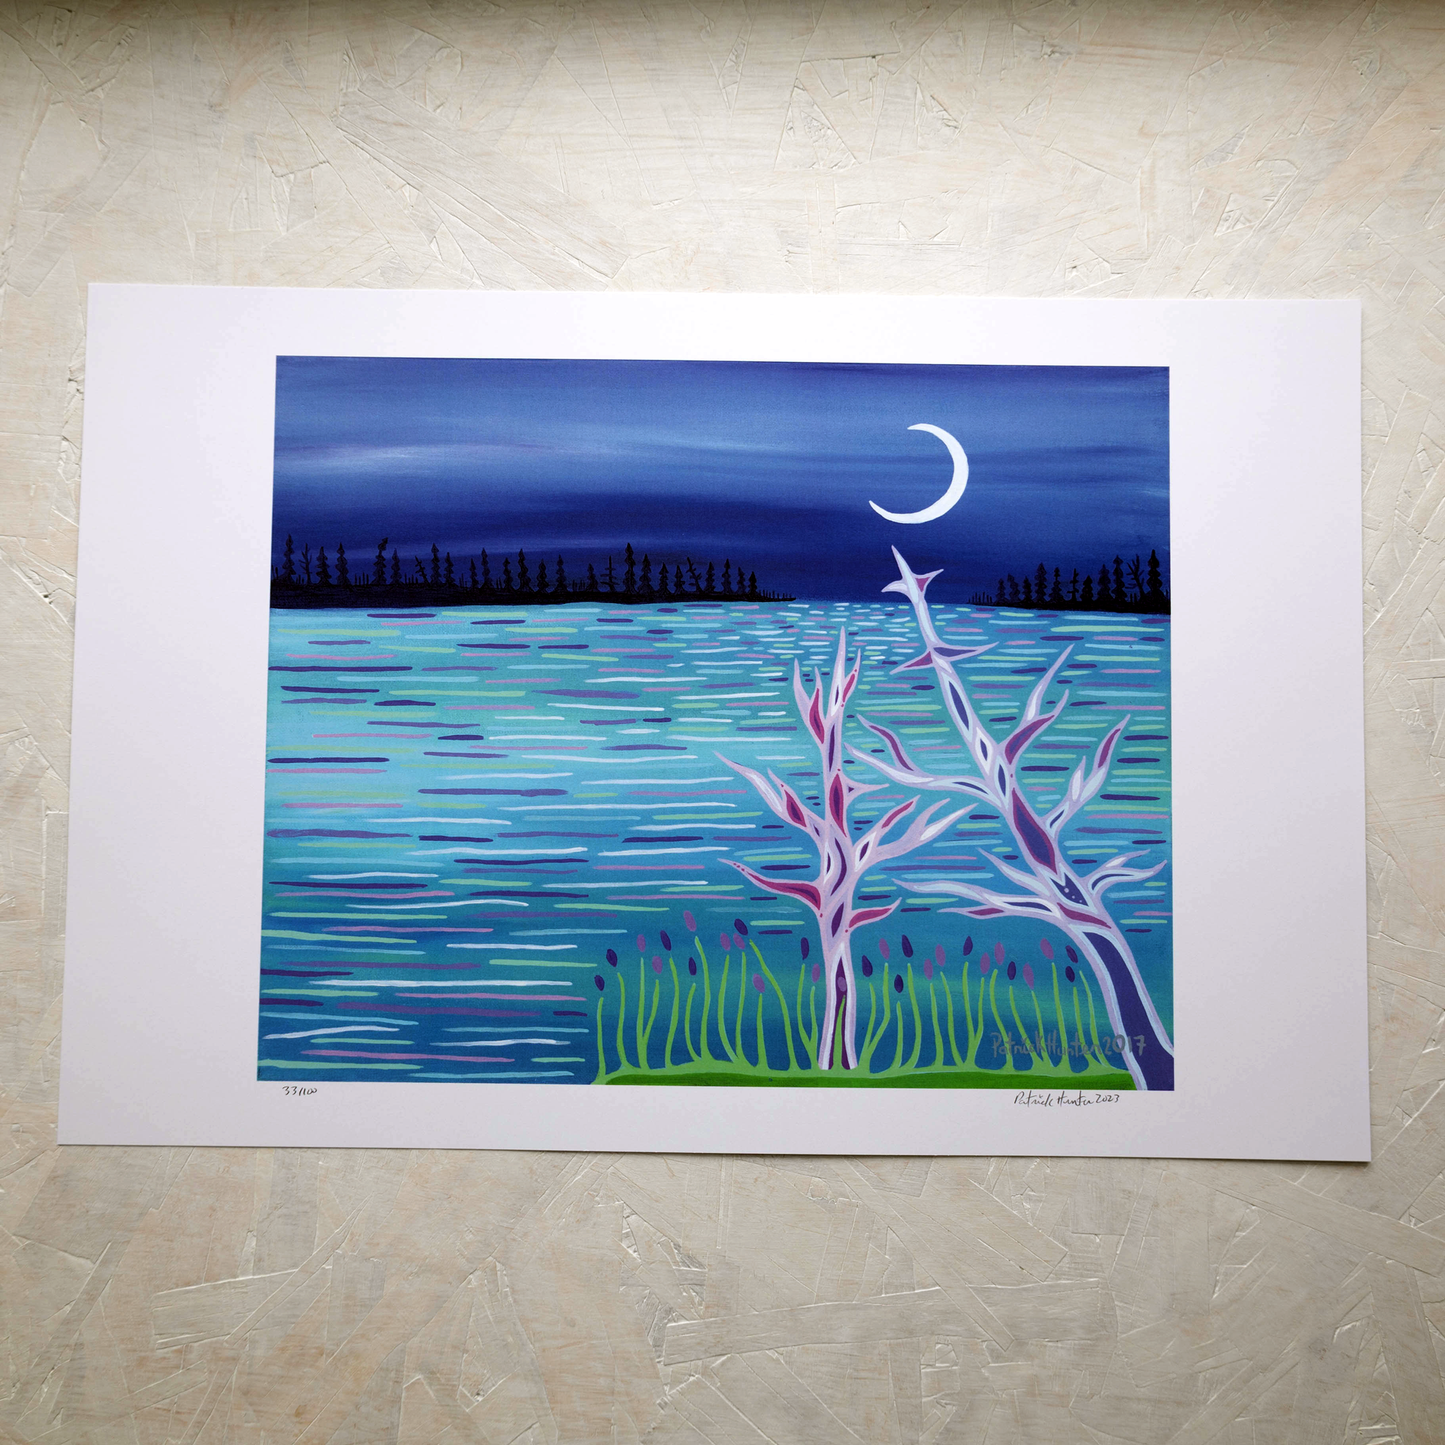 Print of Patrick Hunter's painting of a lake view at night with crescent moon, woodland art style.